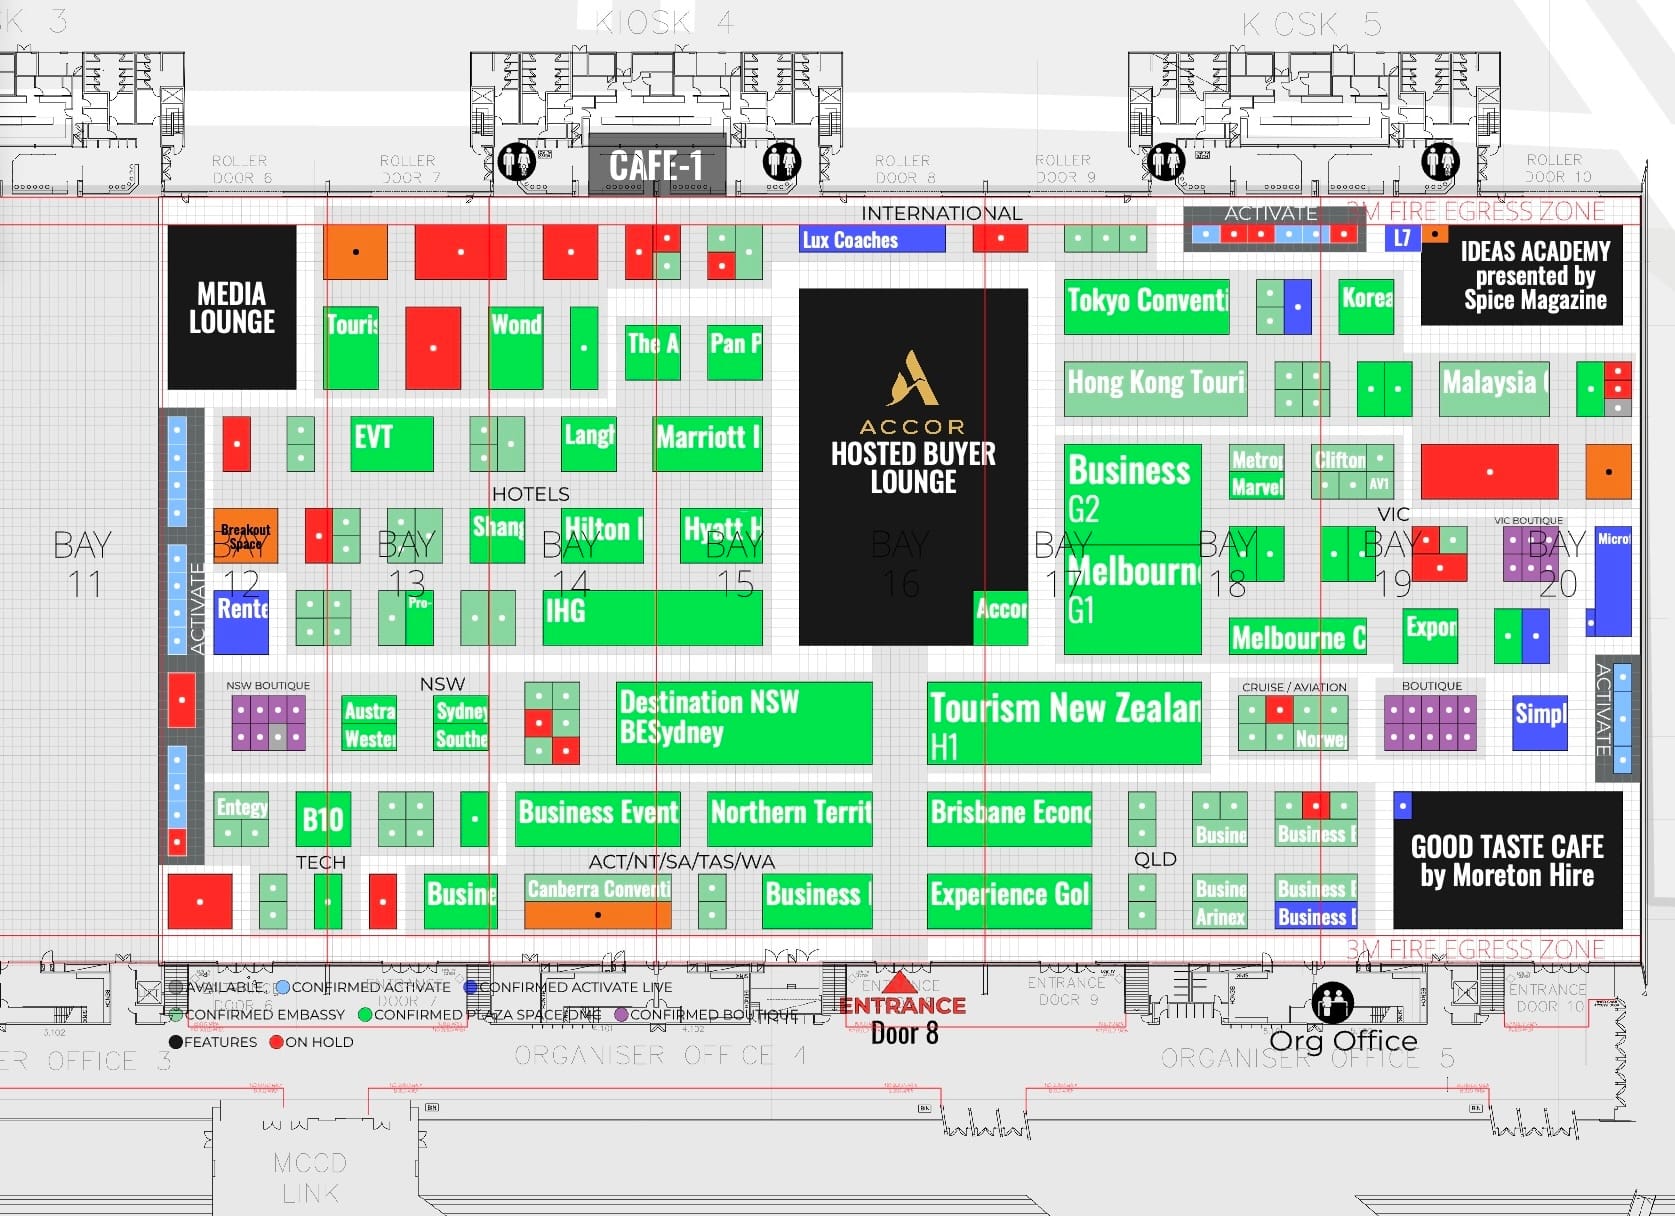 Streamlining Events: The Use Case of Technical Floor Plans at AIME